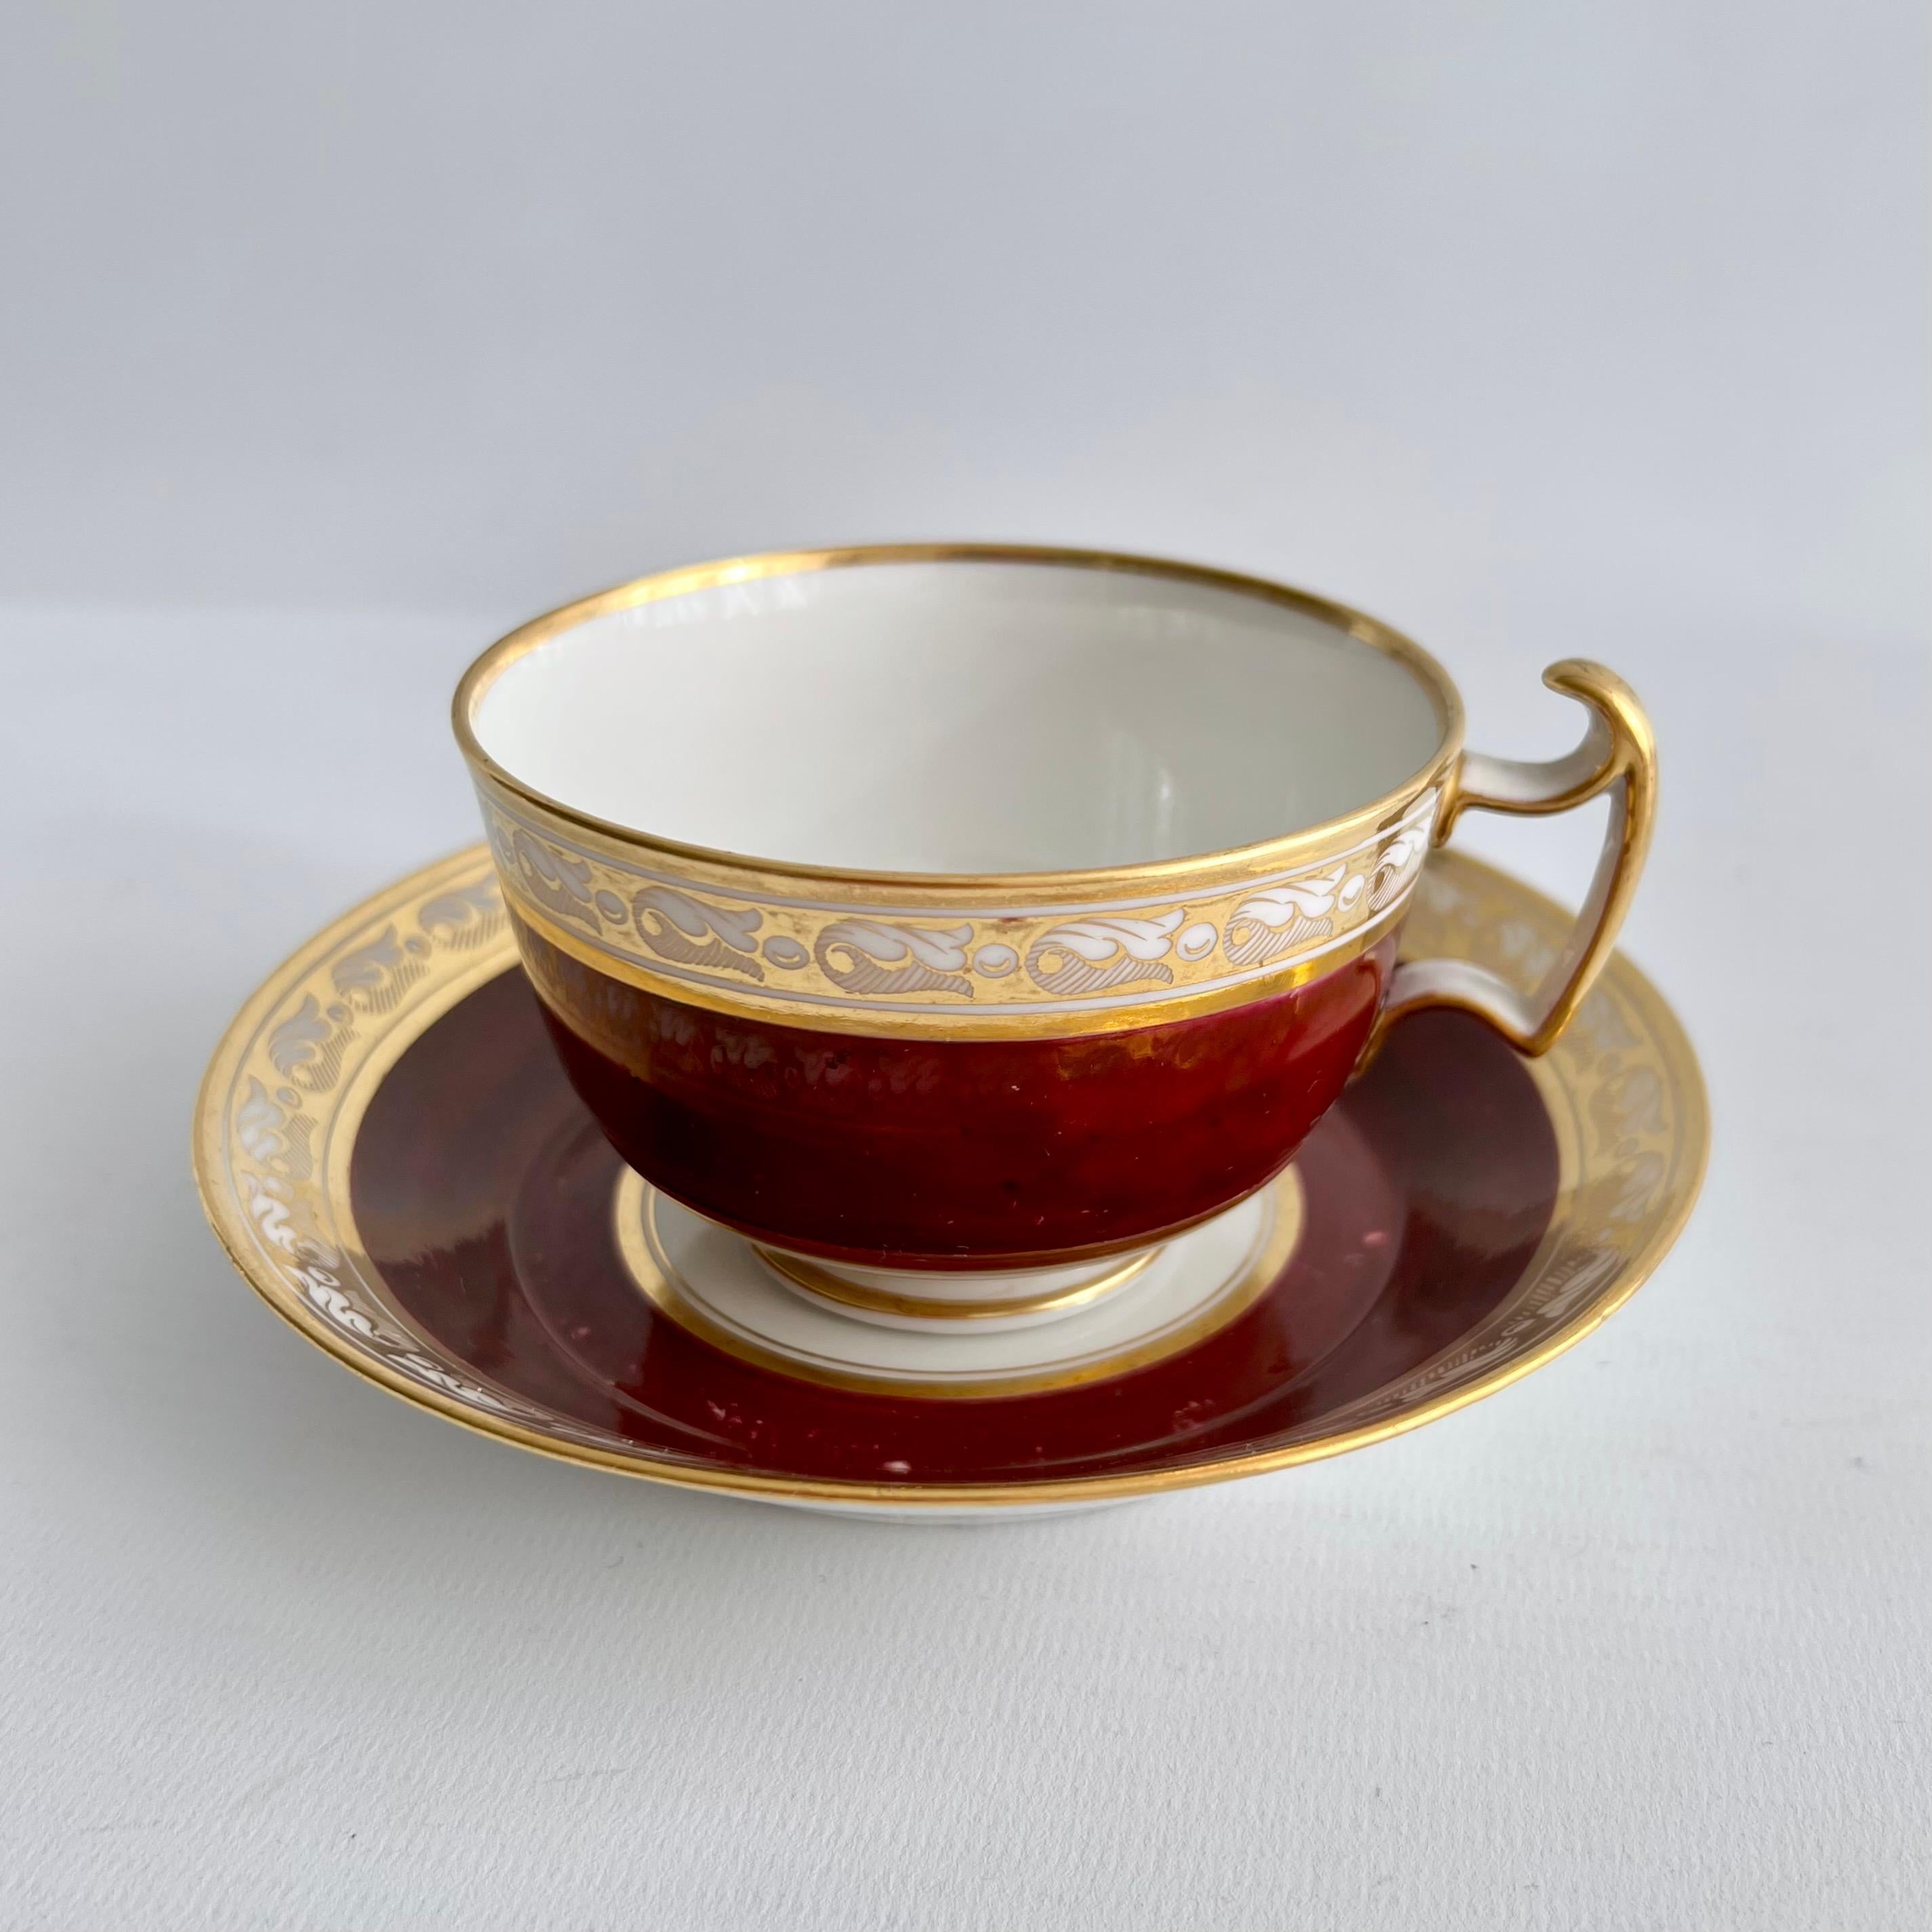 This is a beautiful true trio made by Barr, Flight & Barr, consisting of a teacup, a coffee can and a saucer. The set has a deep maroon ground and a very gracious gilt neoclassical band around the rims.

In the early 19th Century cups and saucers